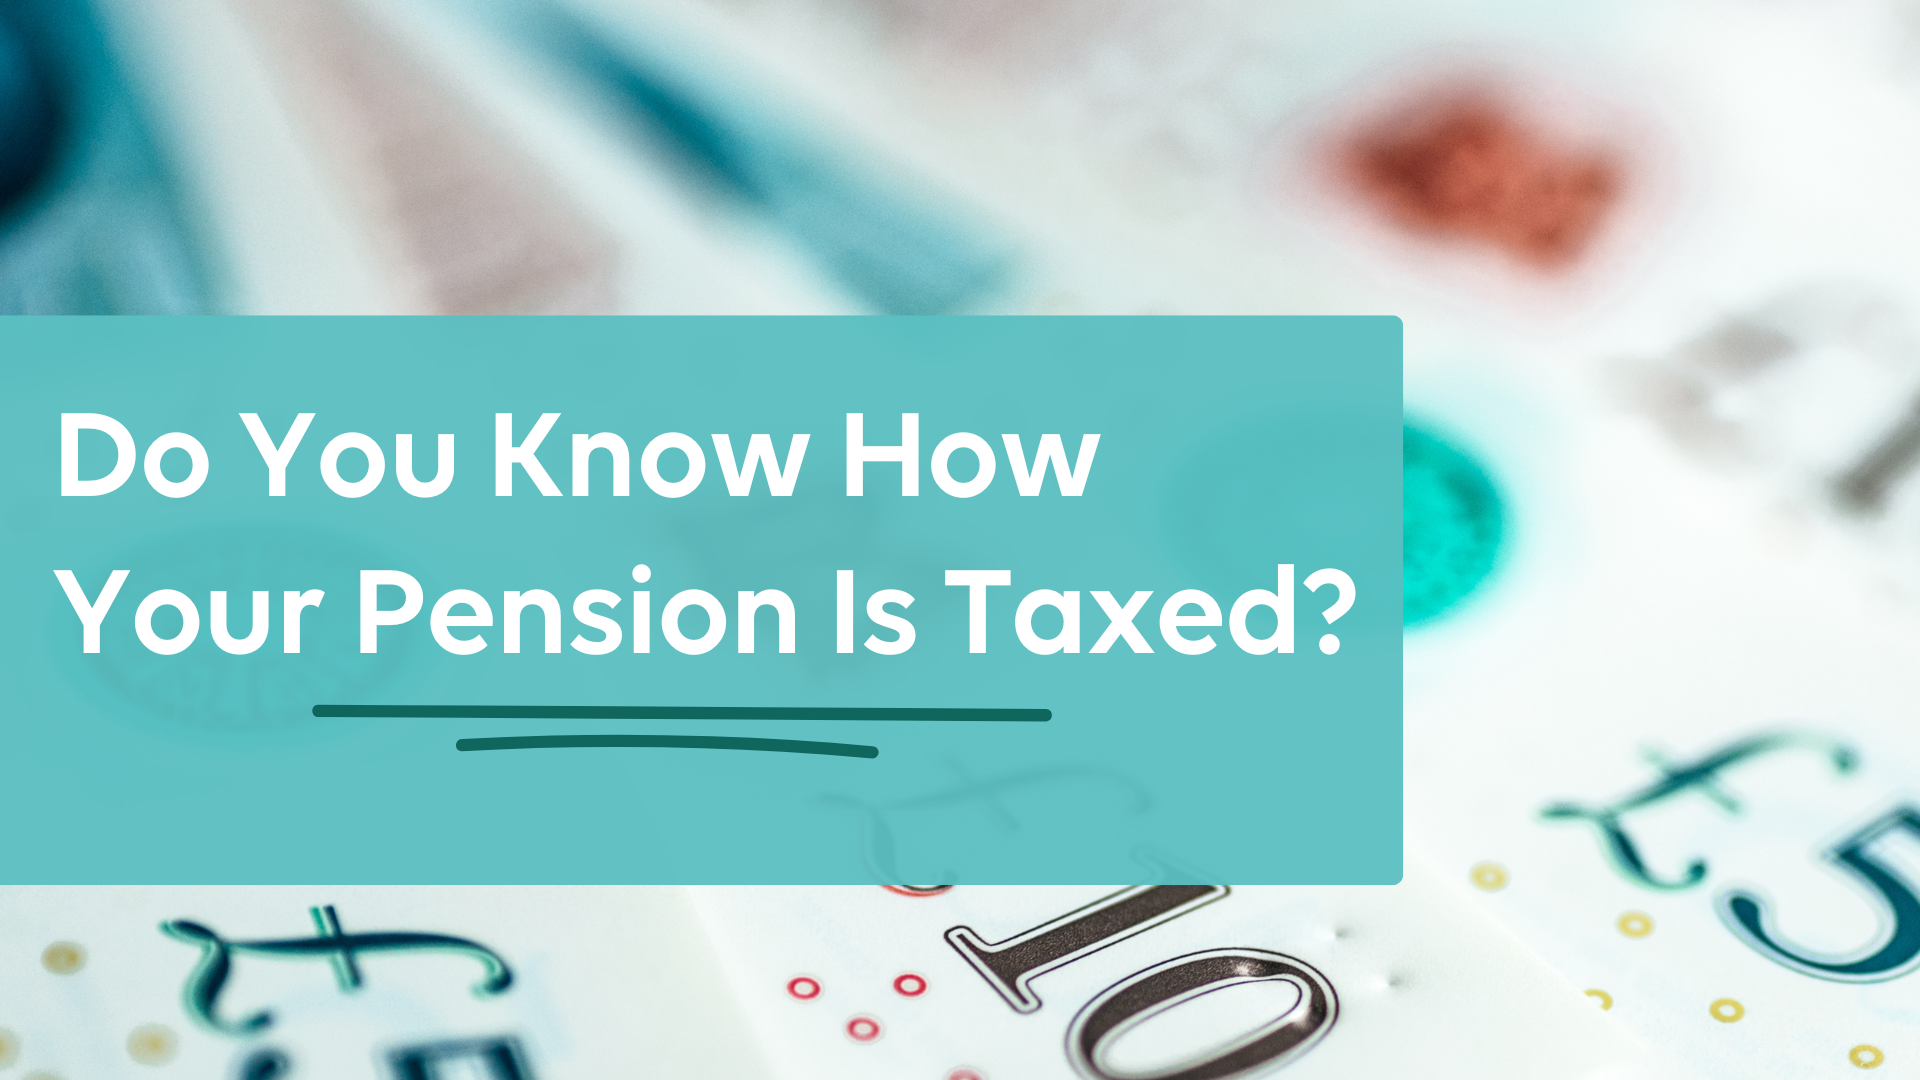 Do You Know How Your Pension Is Taxed?